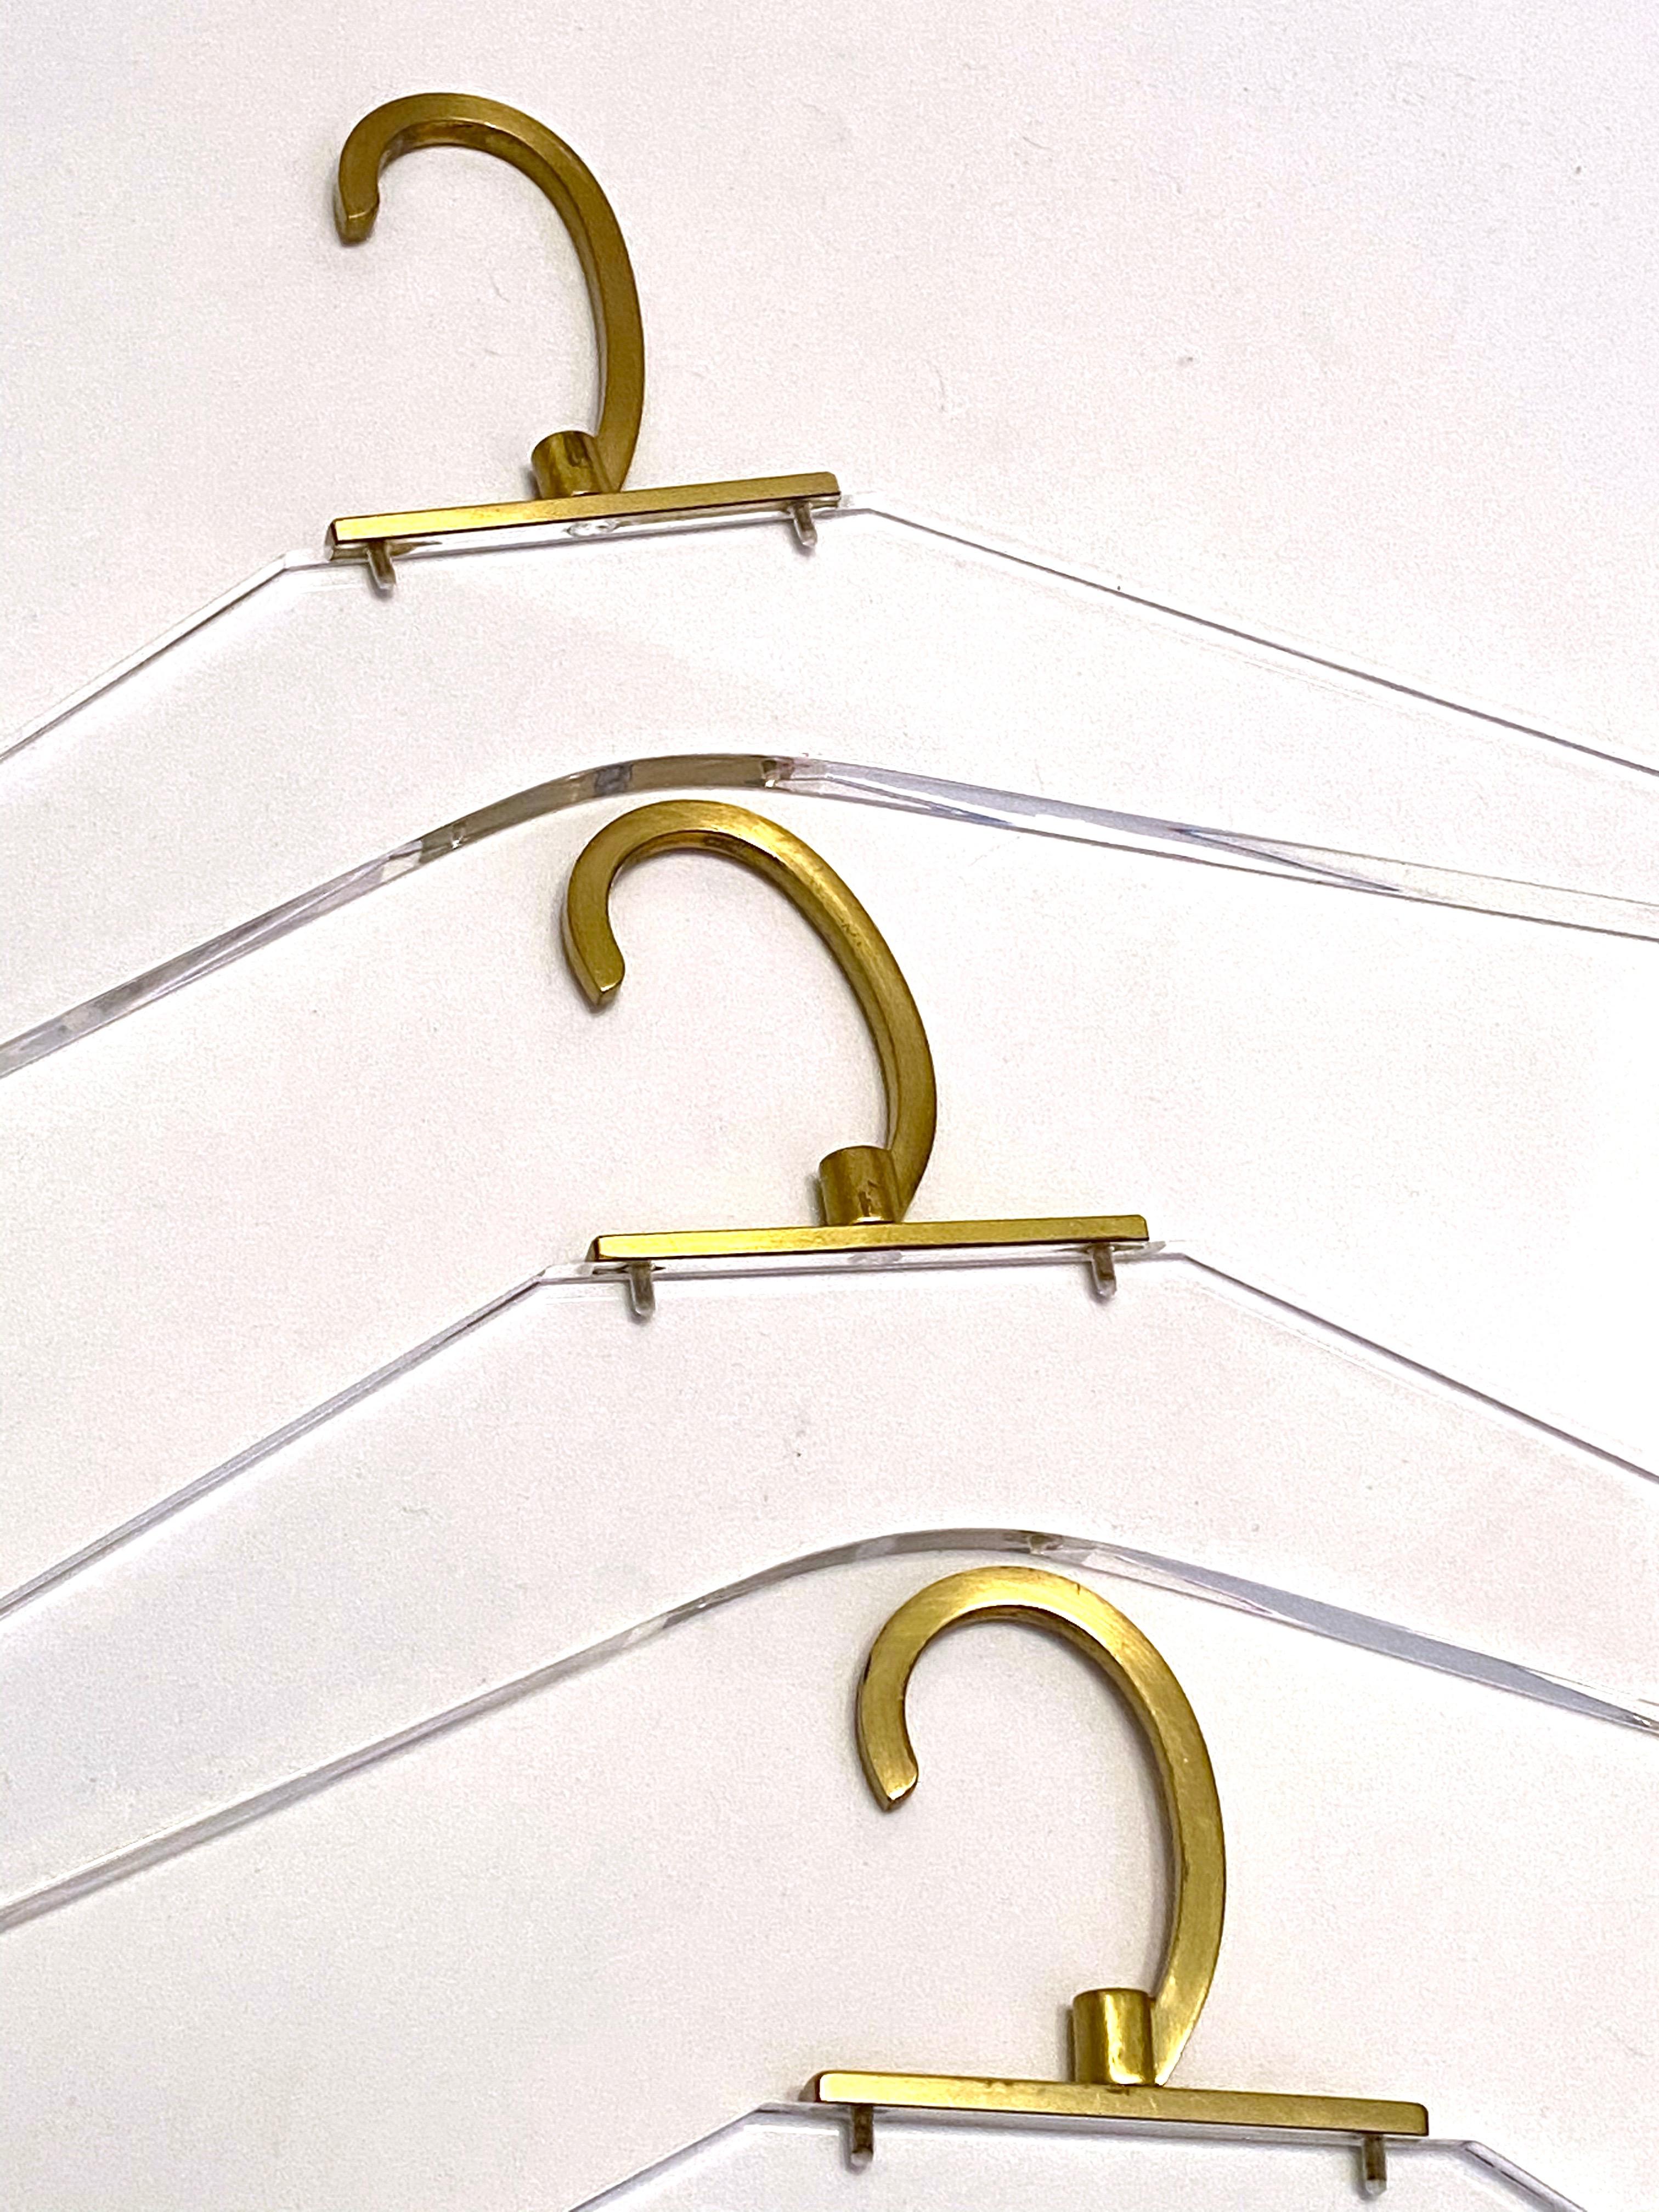 Late 20th Century Three Wall Coat Hooks and Cloth Hanger Sets Lucite and Brass, 1970s German For Sale